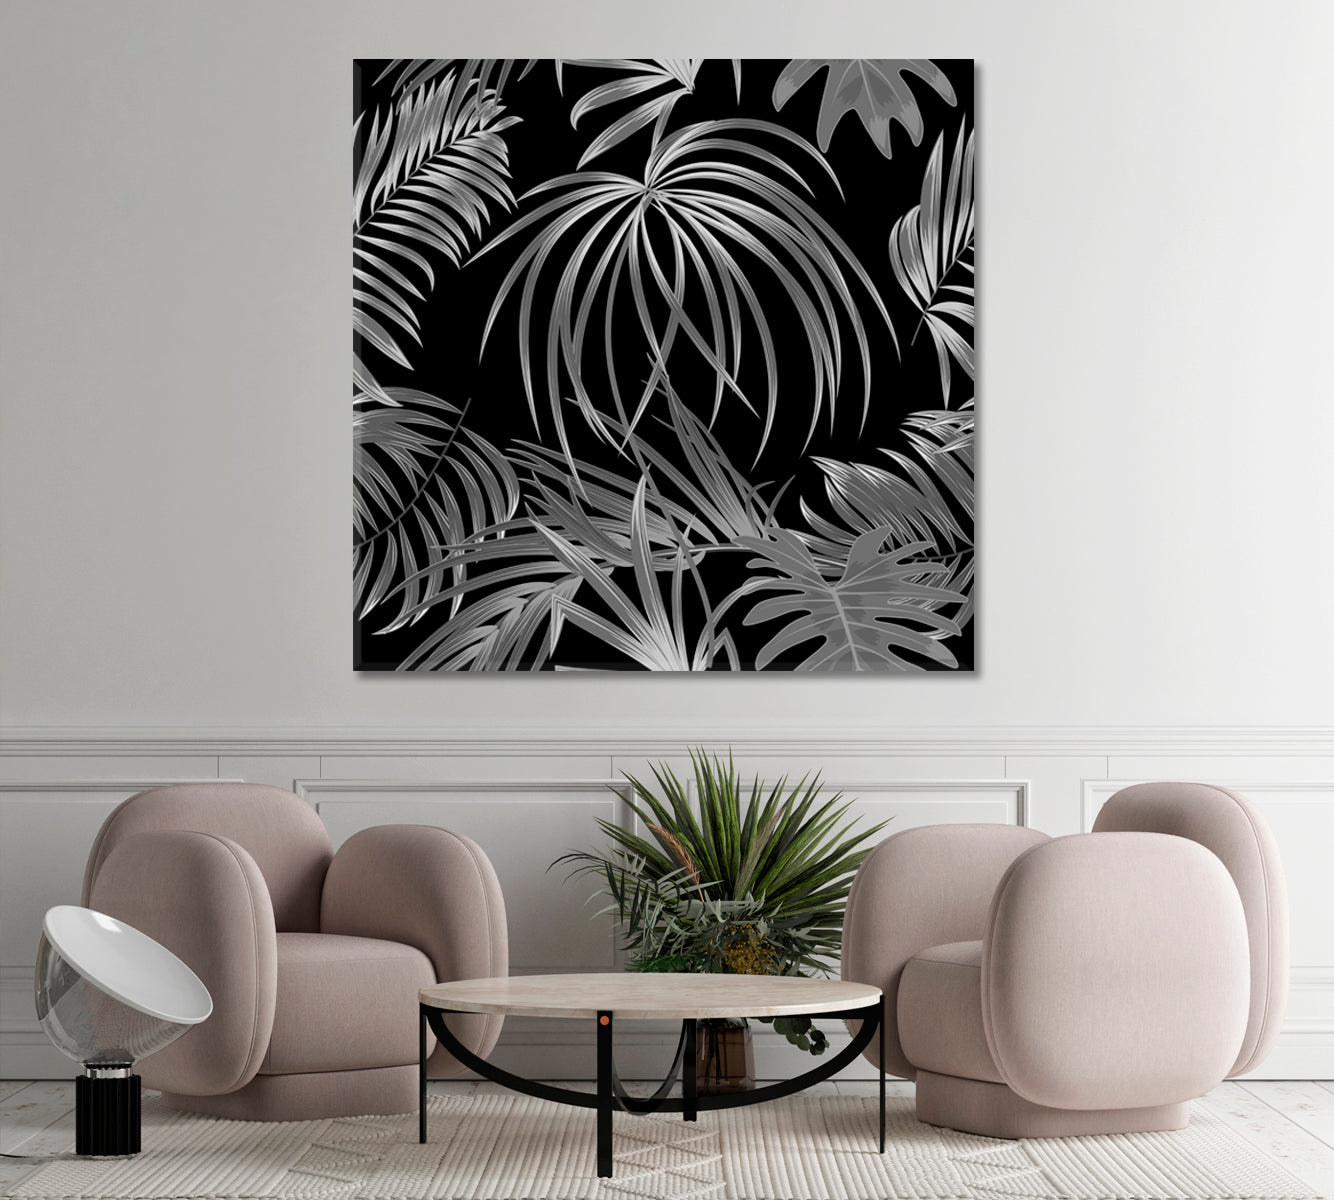 Tropical Jungle Palm Leaves Abstract Poster Tropical, Exotic Art Print Artesty 1 Panel 12"x12" 